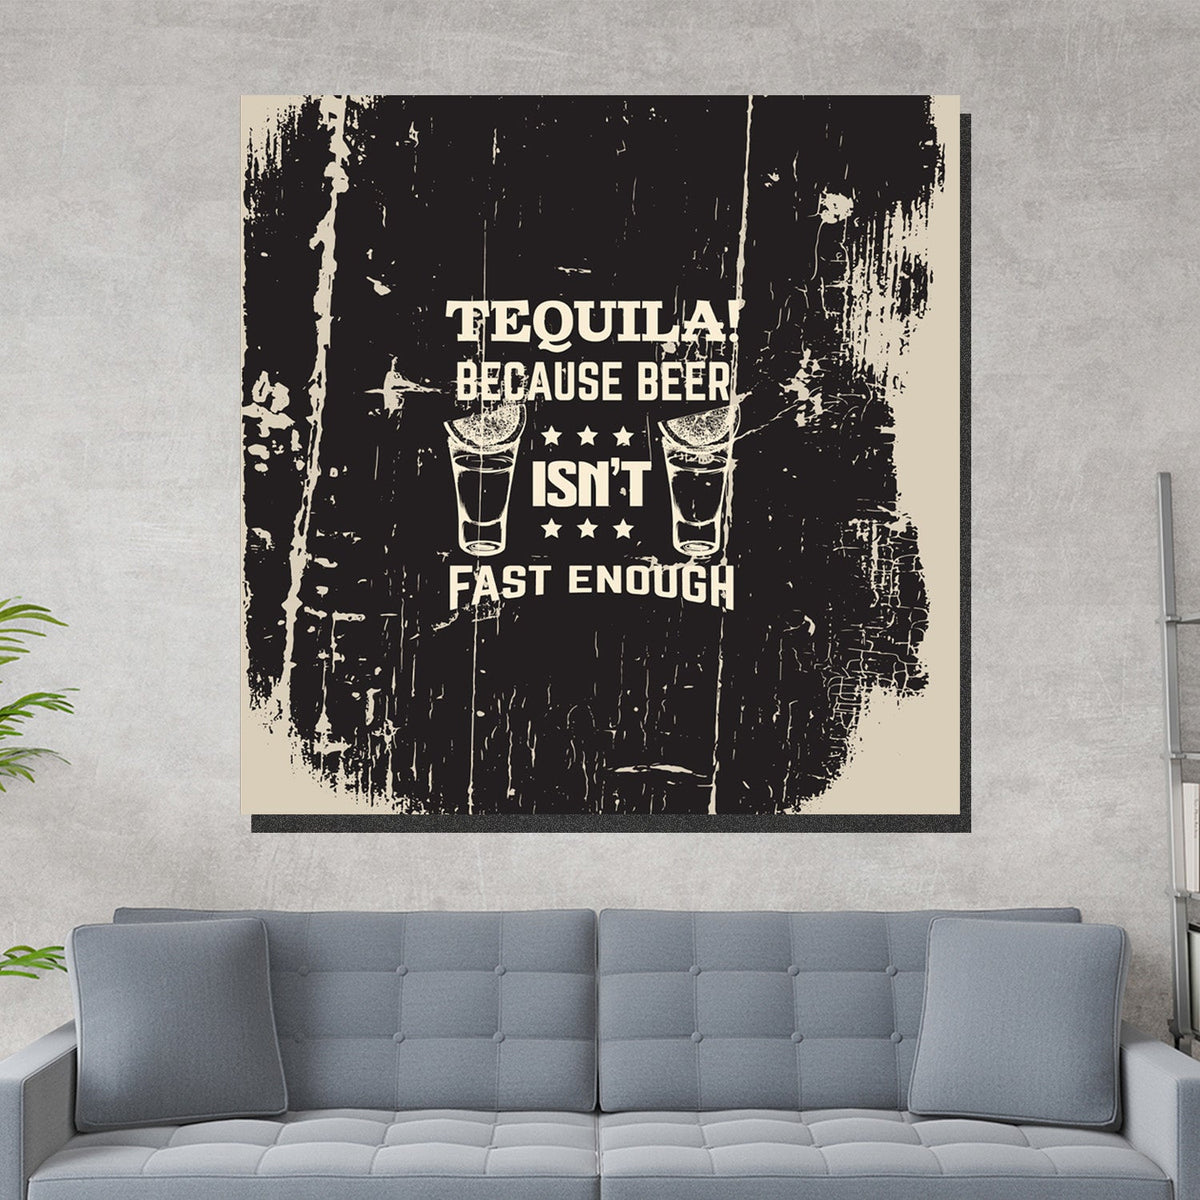 https://cdn.shopify.com/s/files/1/0387/9986/8044/products/TequilaBecauseCanvasArtprintStretched-3.jpg